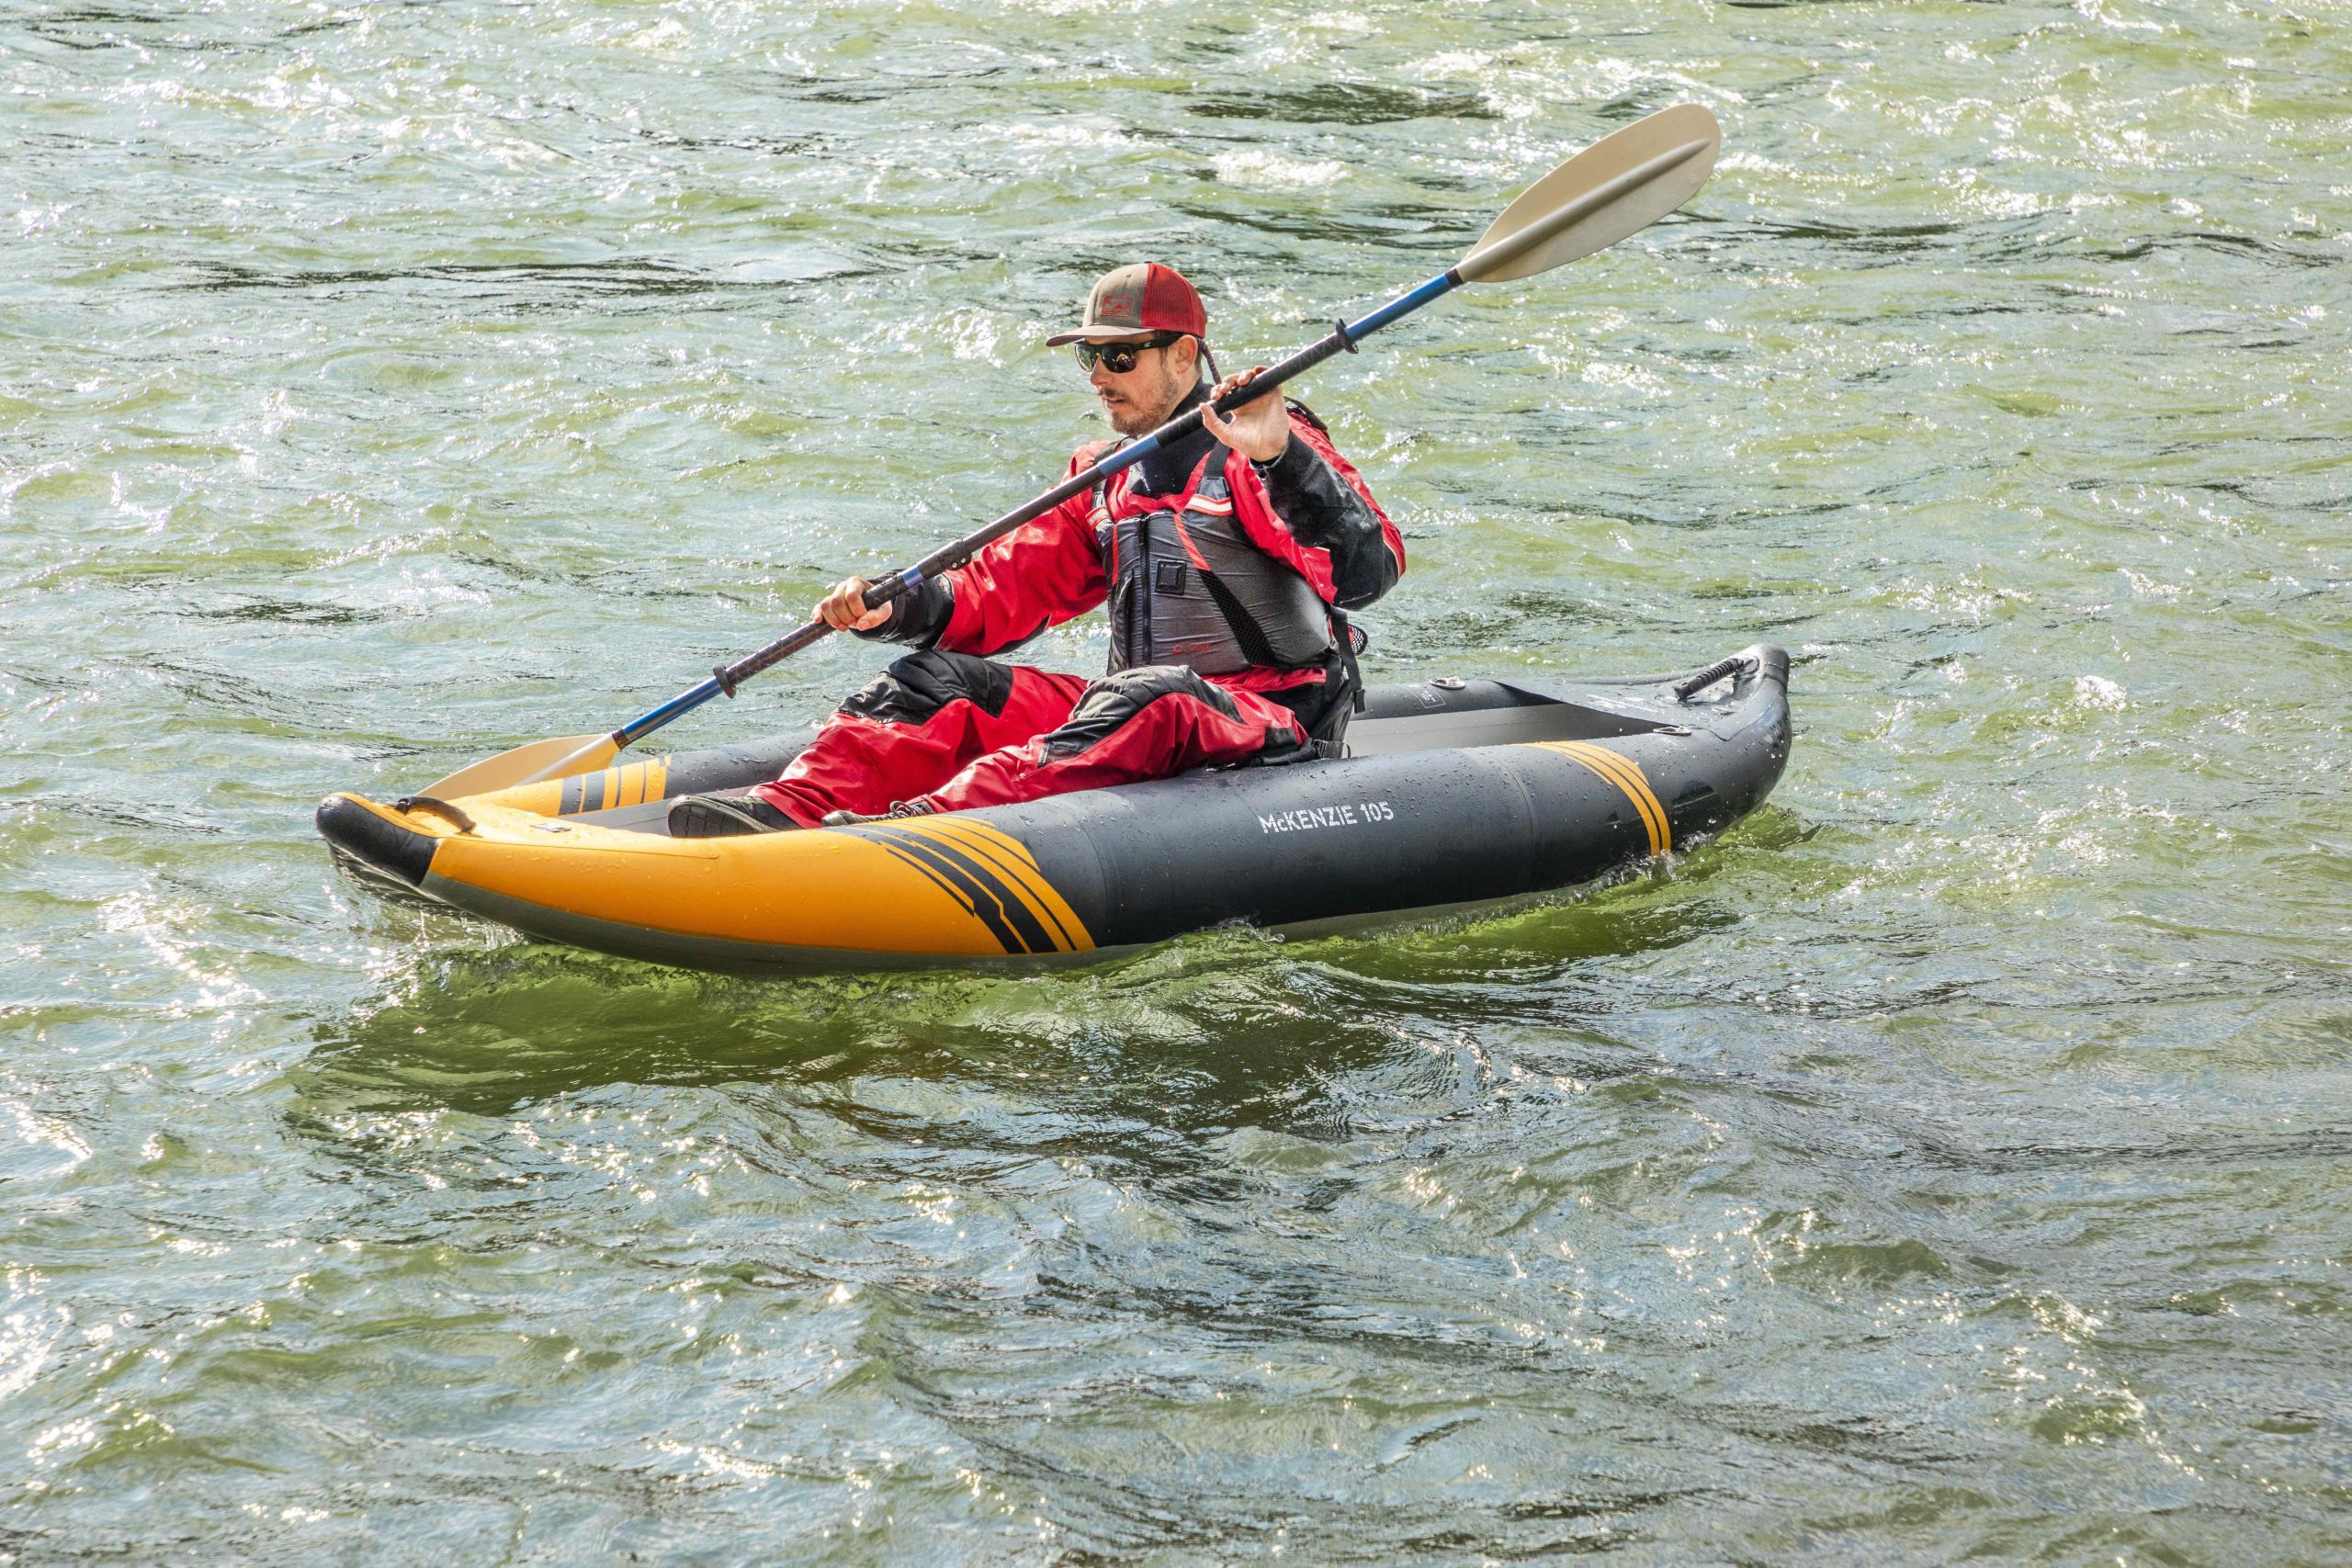 6 Tips For Keeping Warm During a Fall or Winter Paddle